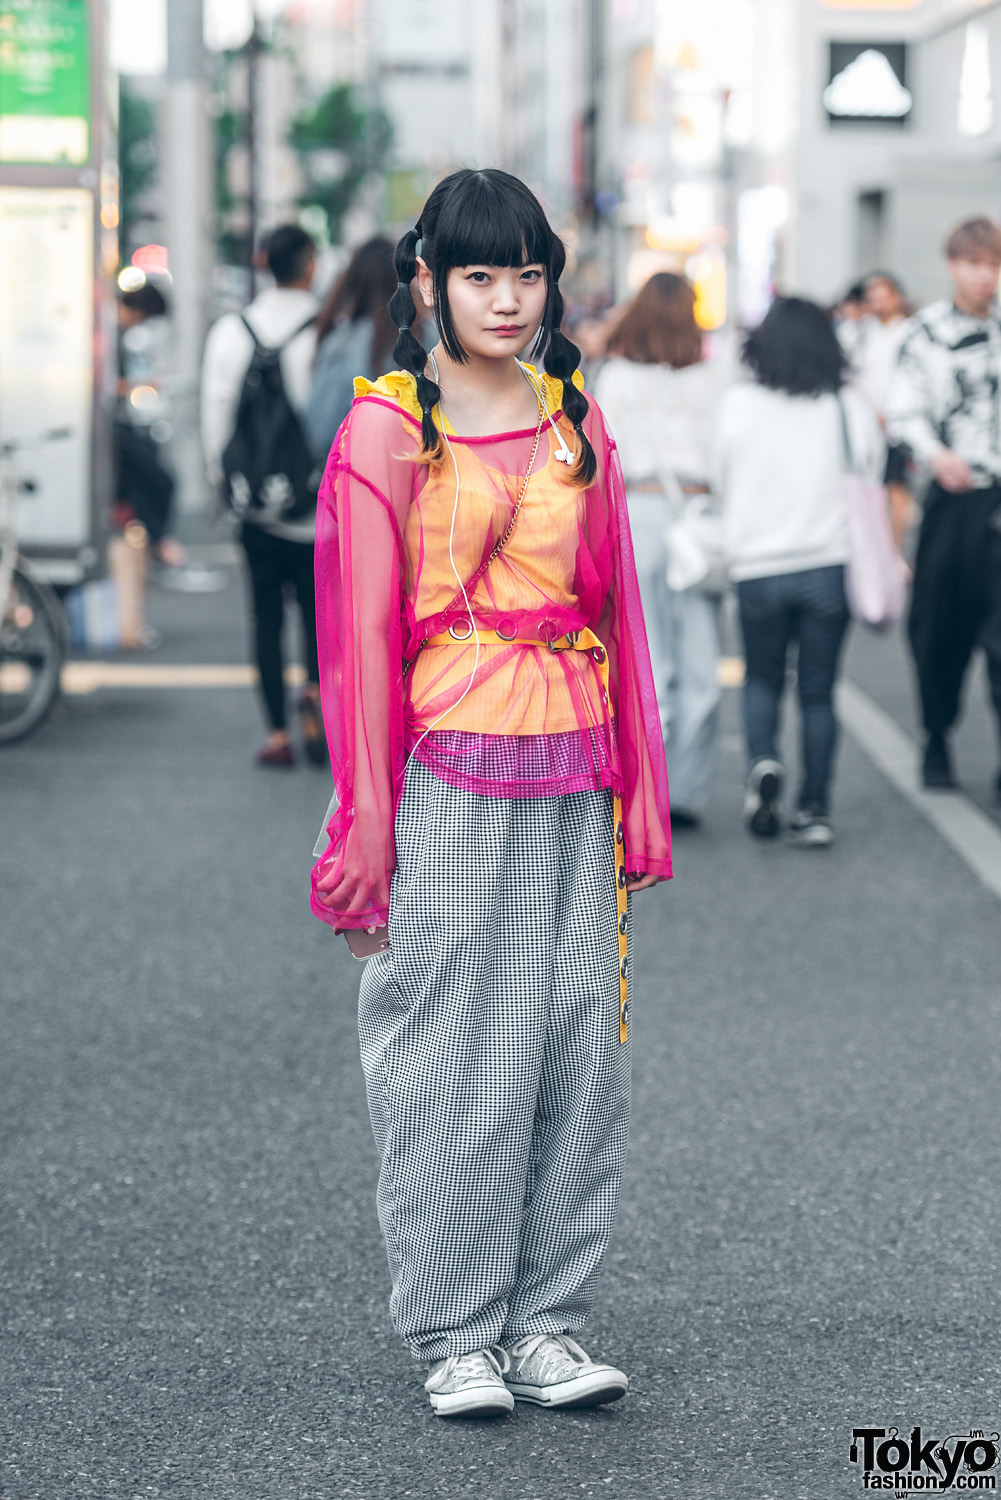 Twin-Tailed Harajuku Girl in Southpaw Cathy Remake Street Fashion w/ Sheer Top, Checkered Pants, WC & Converse